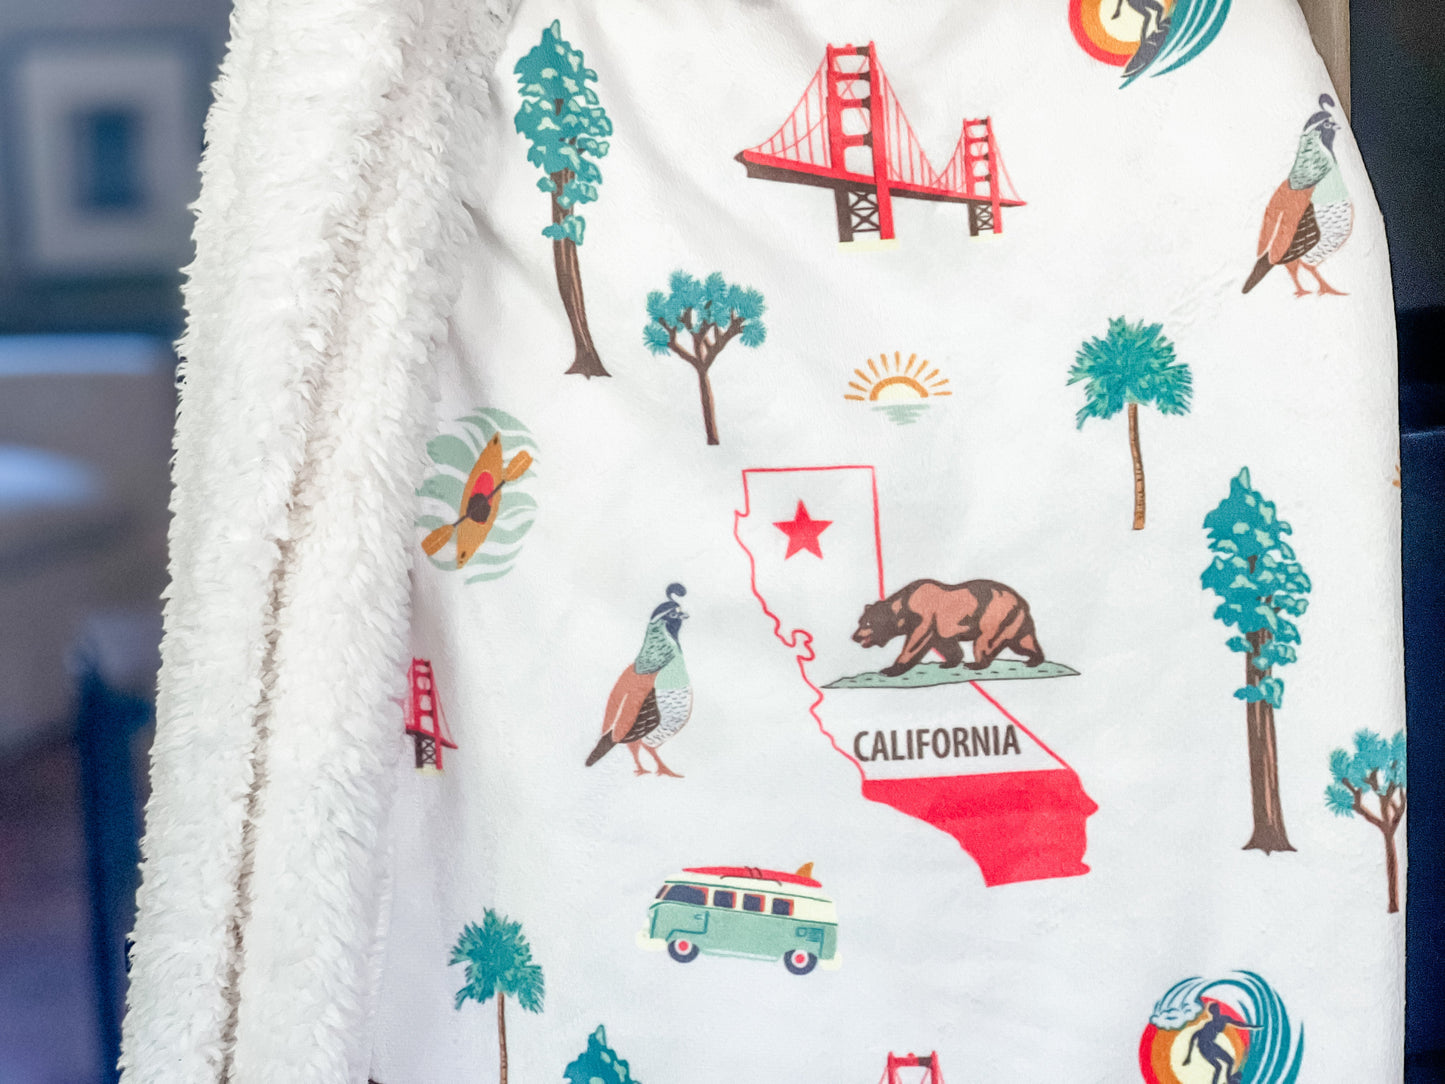 California-themed plush throw blanket with a vibrant sunset, palm trees, and "California" text in bold white letters.